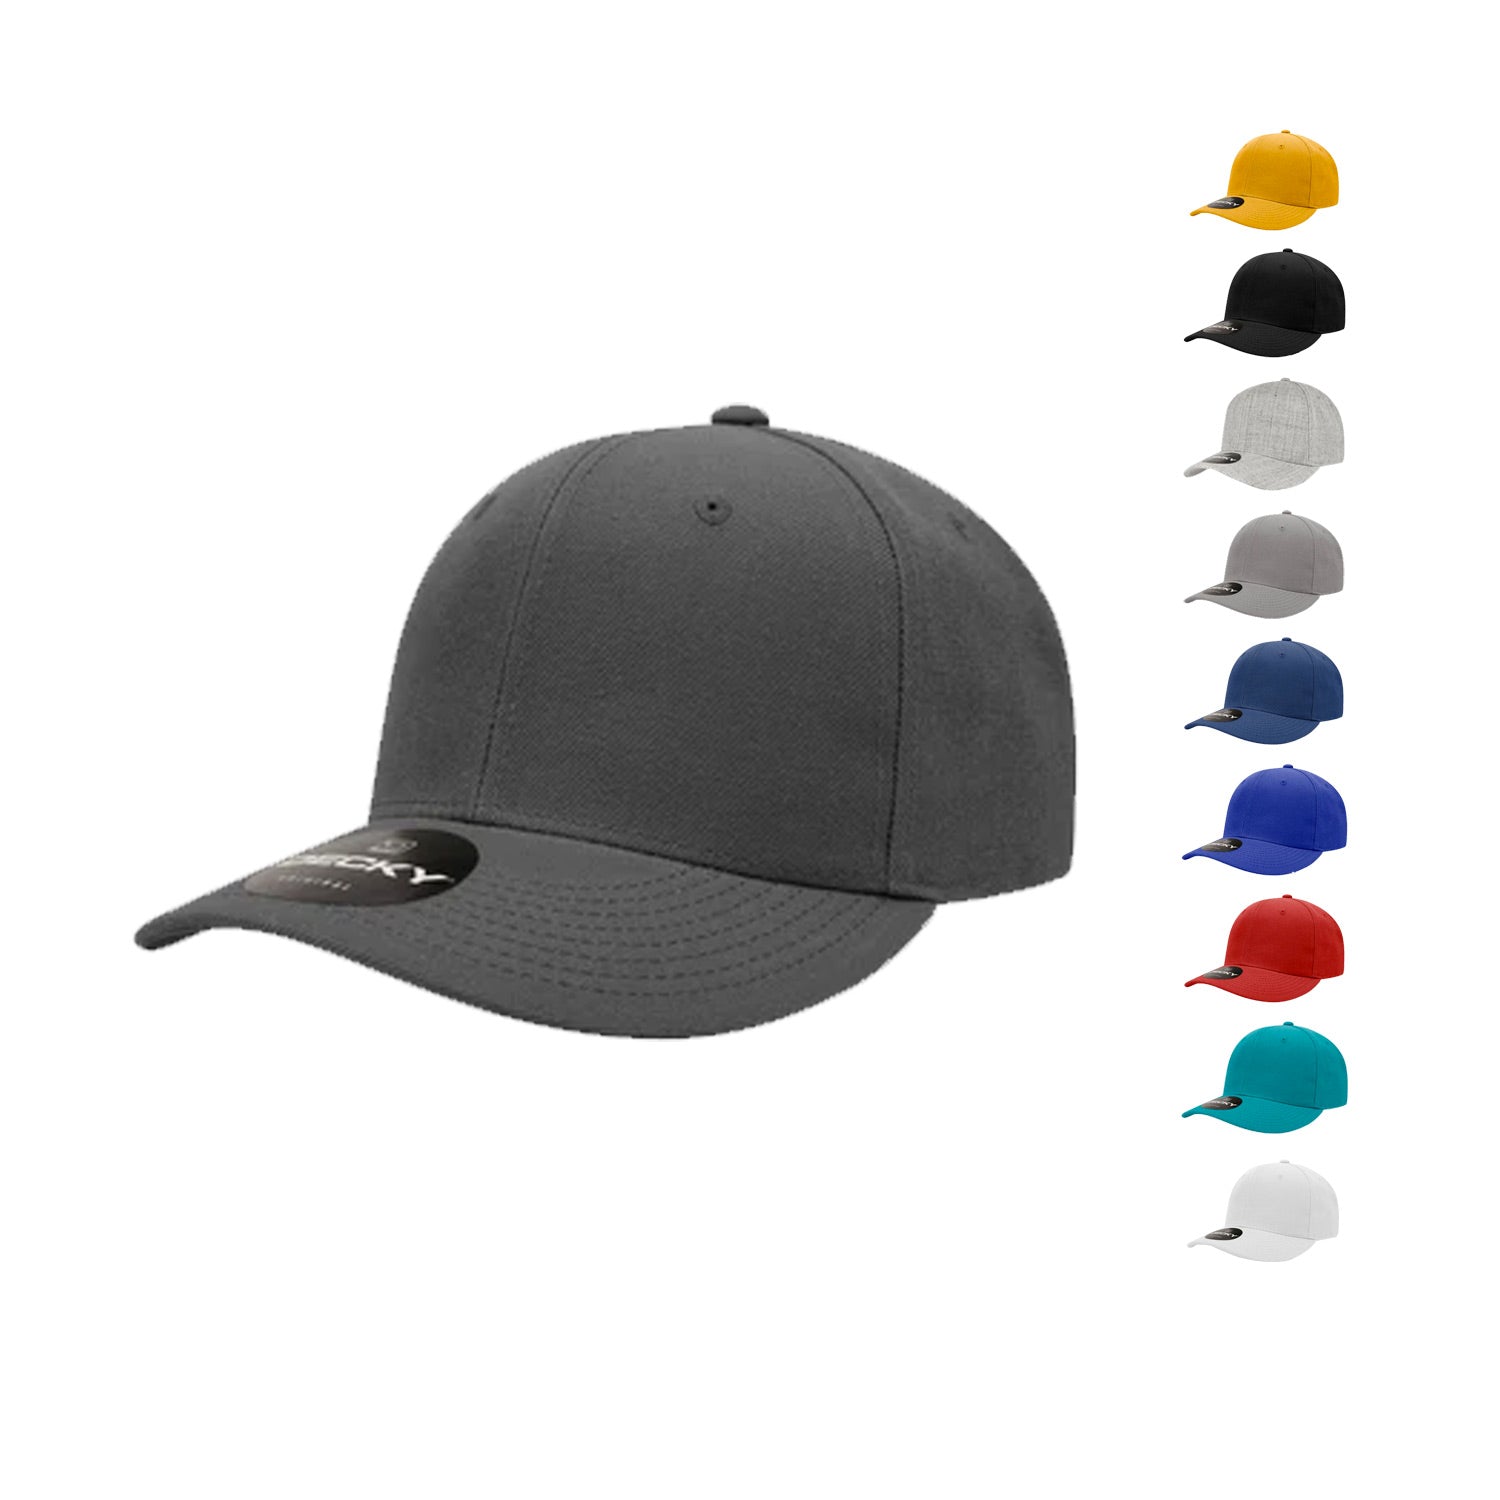 Trucker Hats 1040 Structured Panel 5 Caps Profile Snapback Blank Decky High